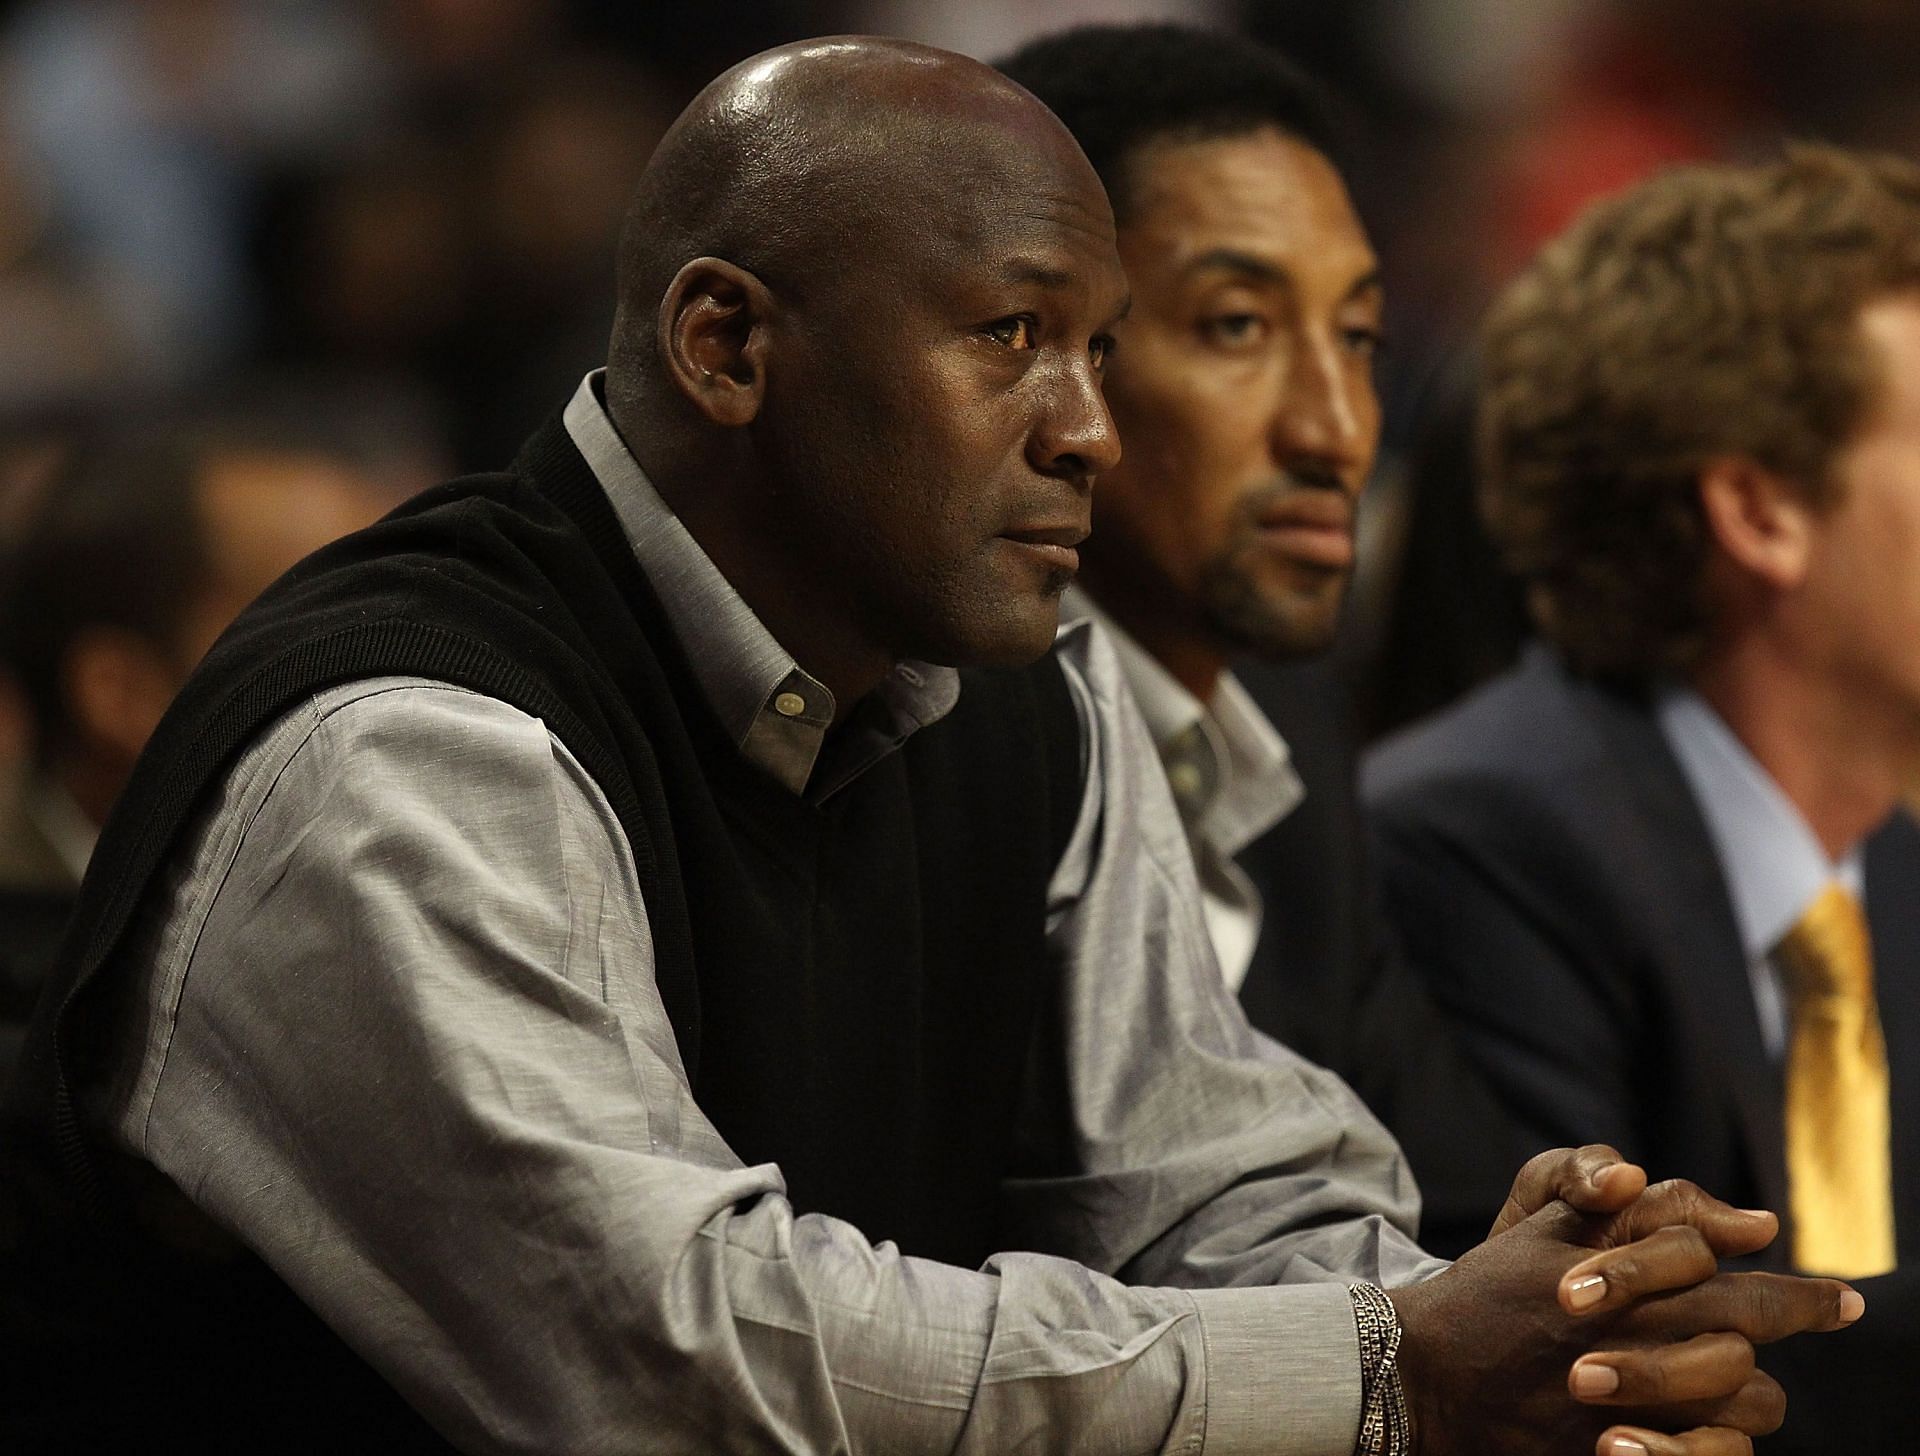 Michael Jordan, left, and Scottie Pippen courtside for a game